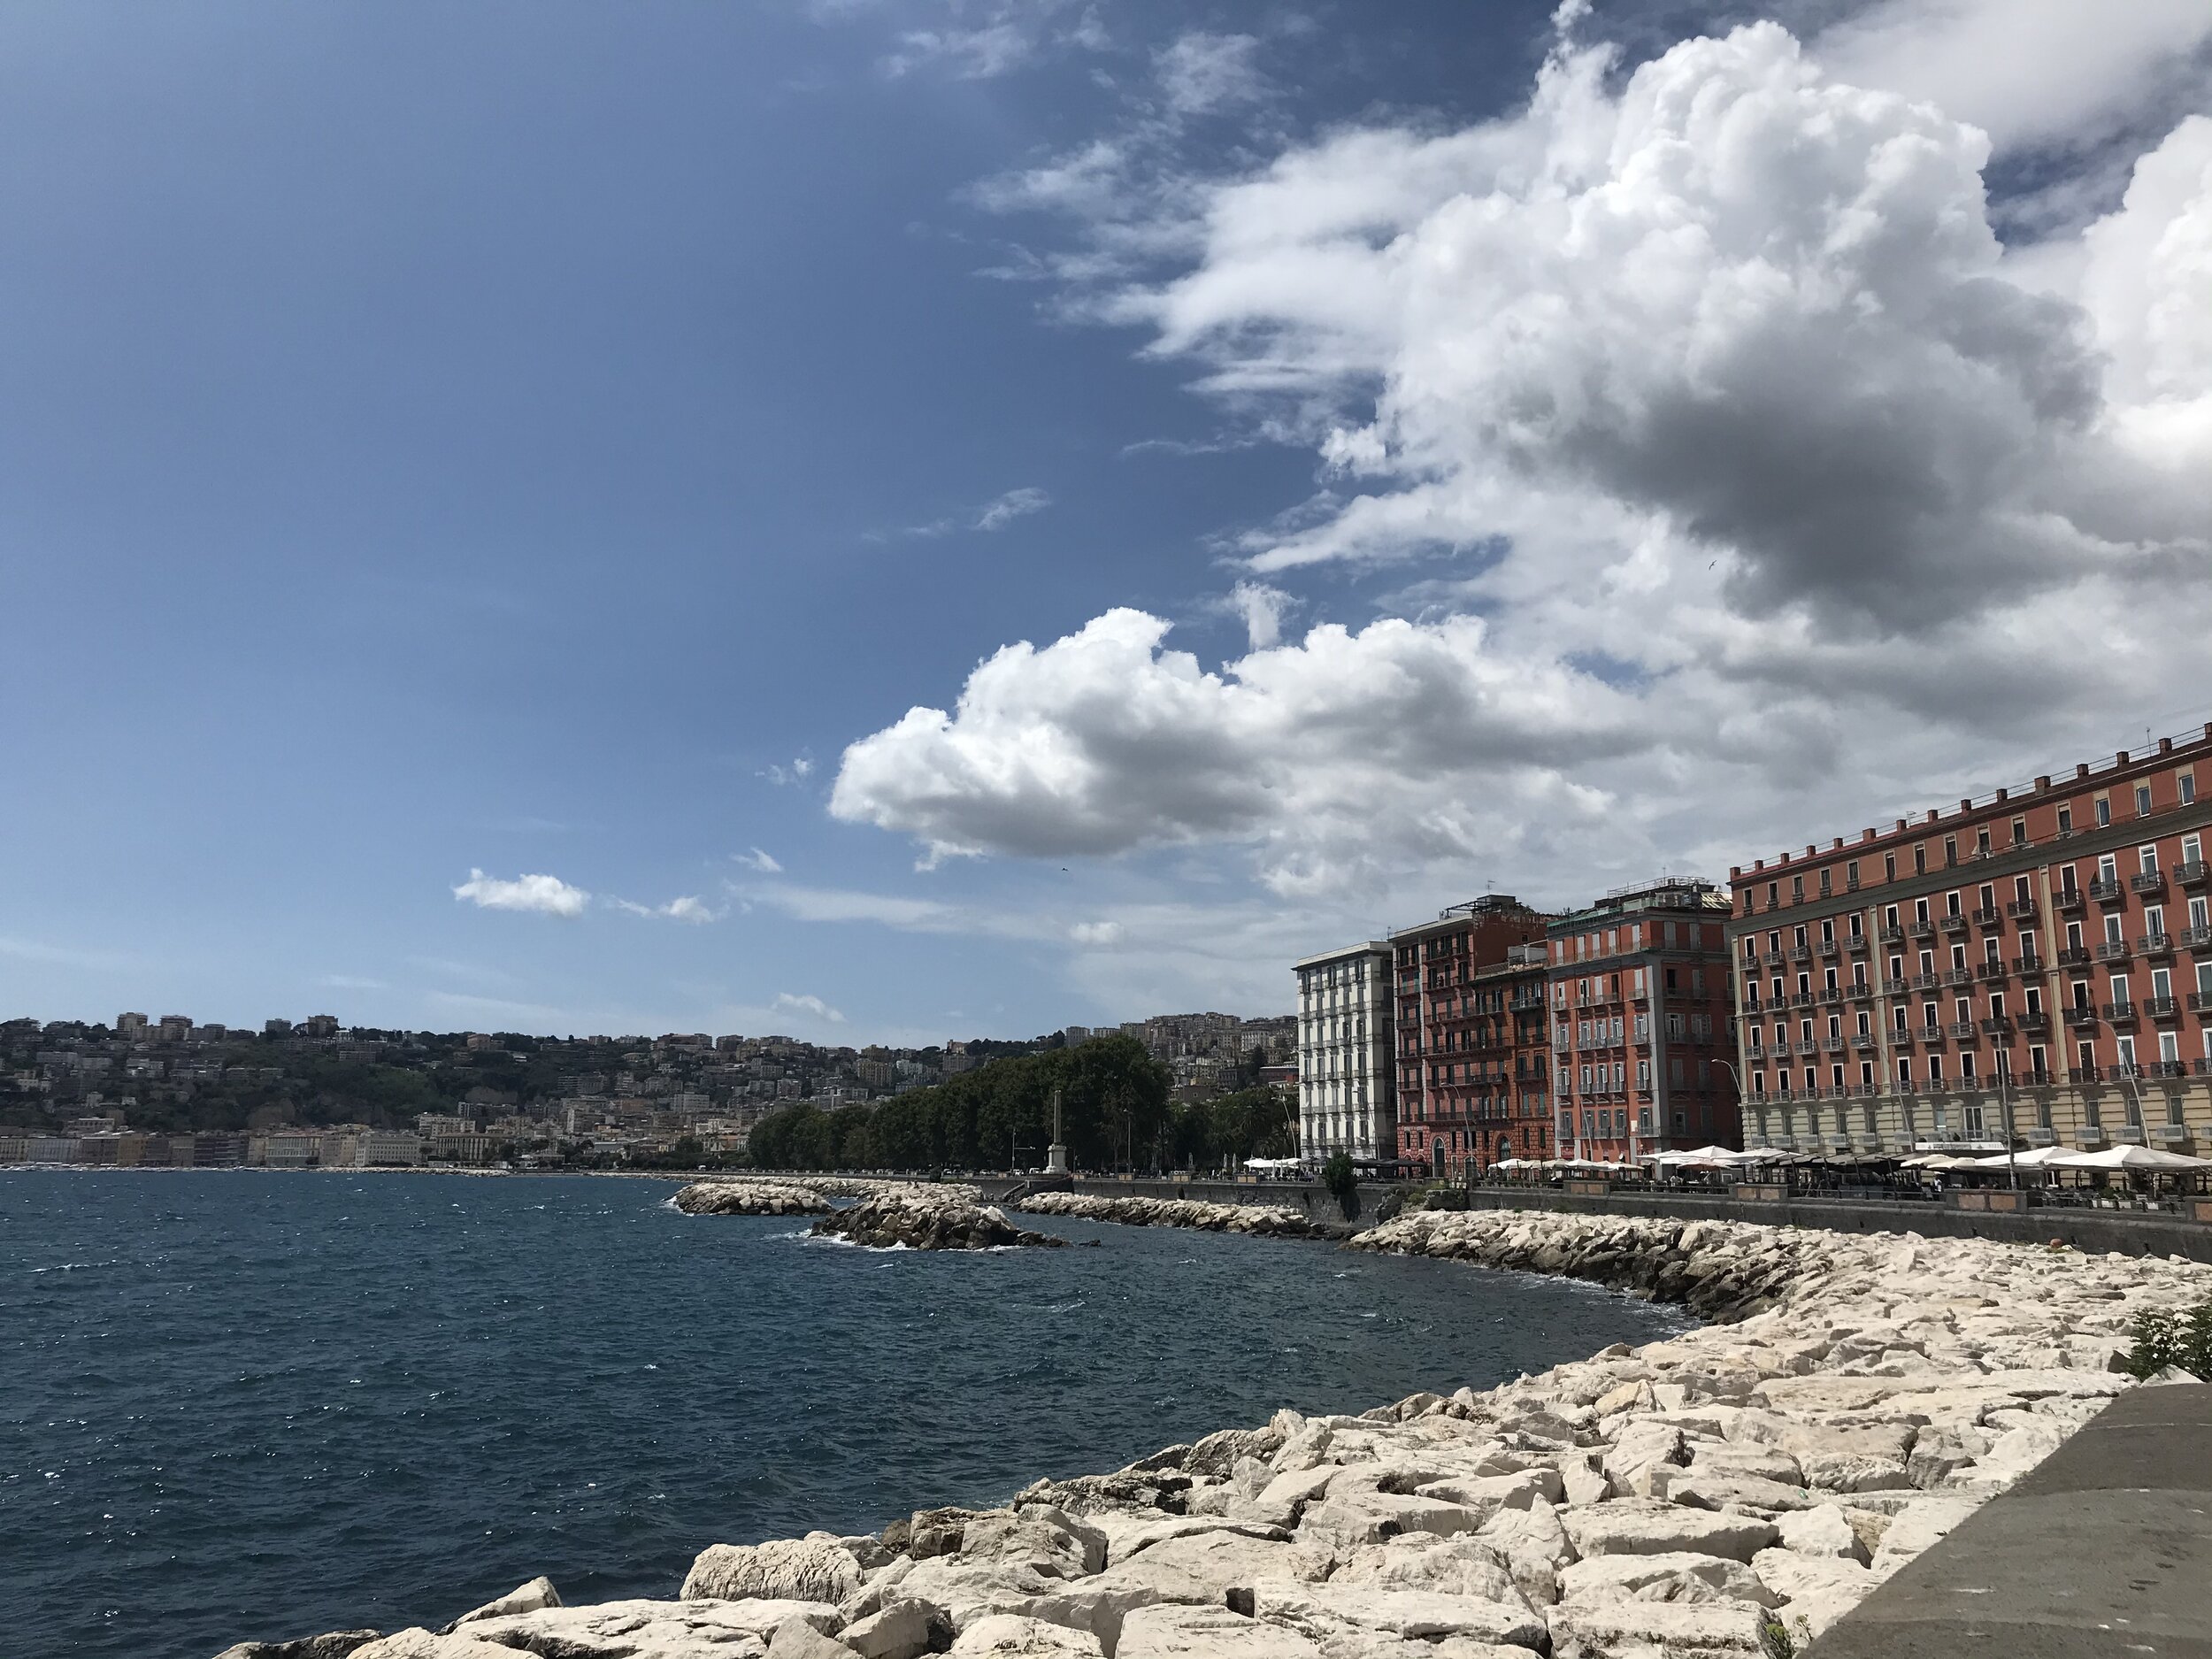 NAPOLI, Italy. August 7th, 2020. PICTURED: The Lungo Mare or “long sea road” stretches around the corner on which sits Castel Dell’ovo. Restaurants, hotels, and diving rocks sit on the sunny Mediterranean.